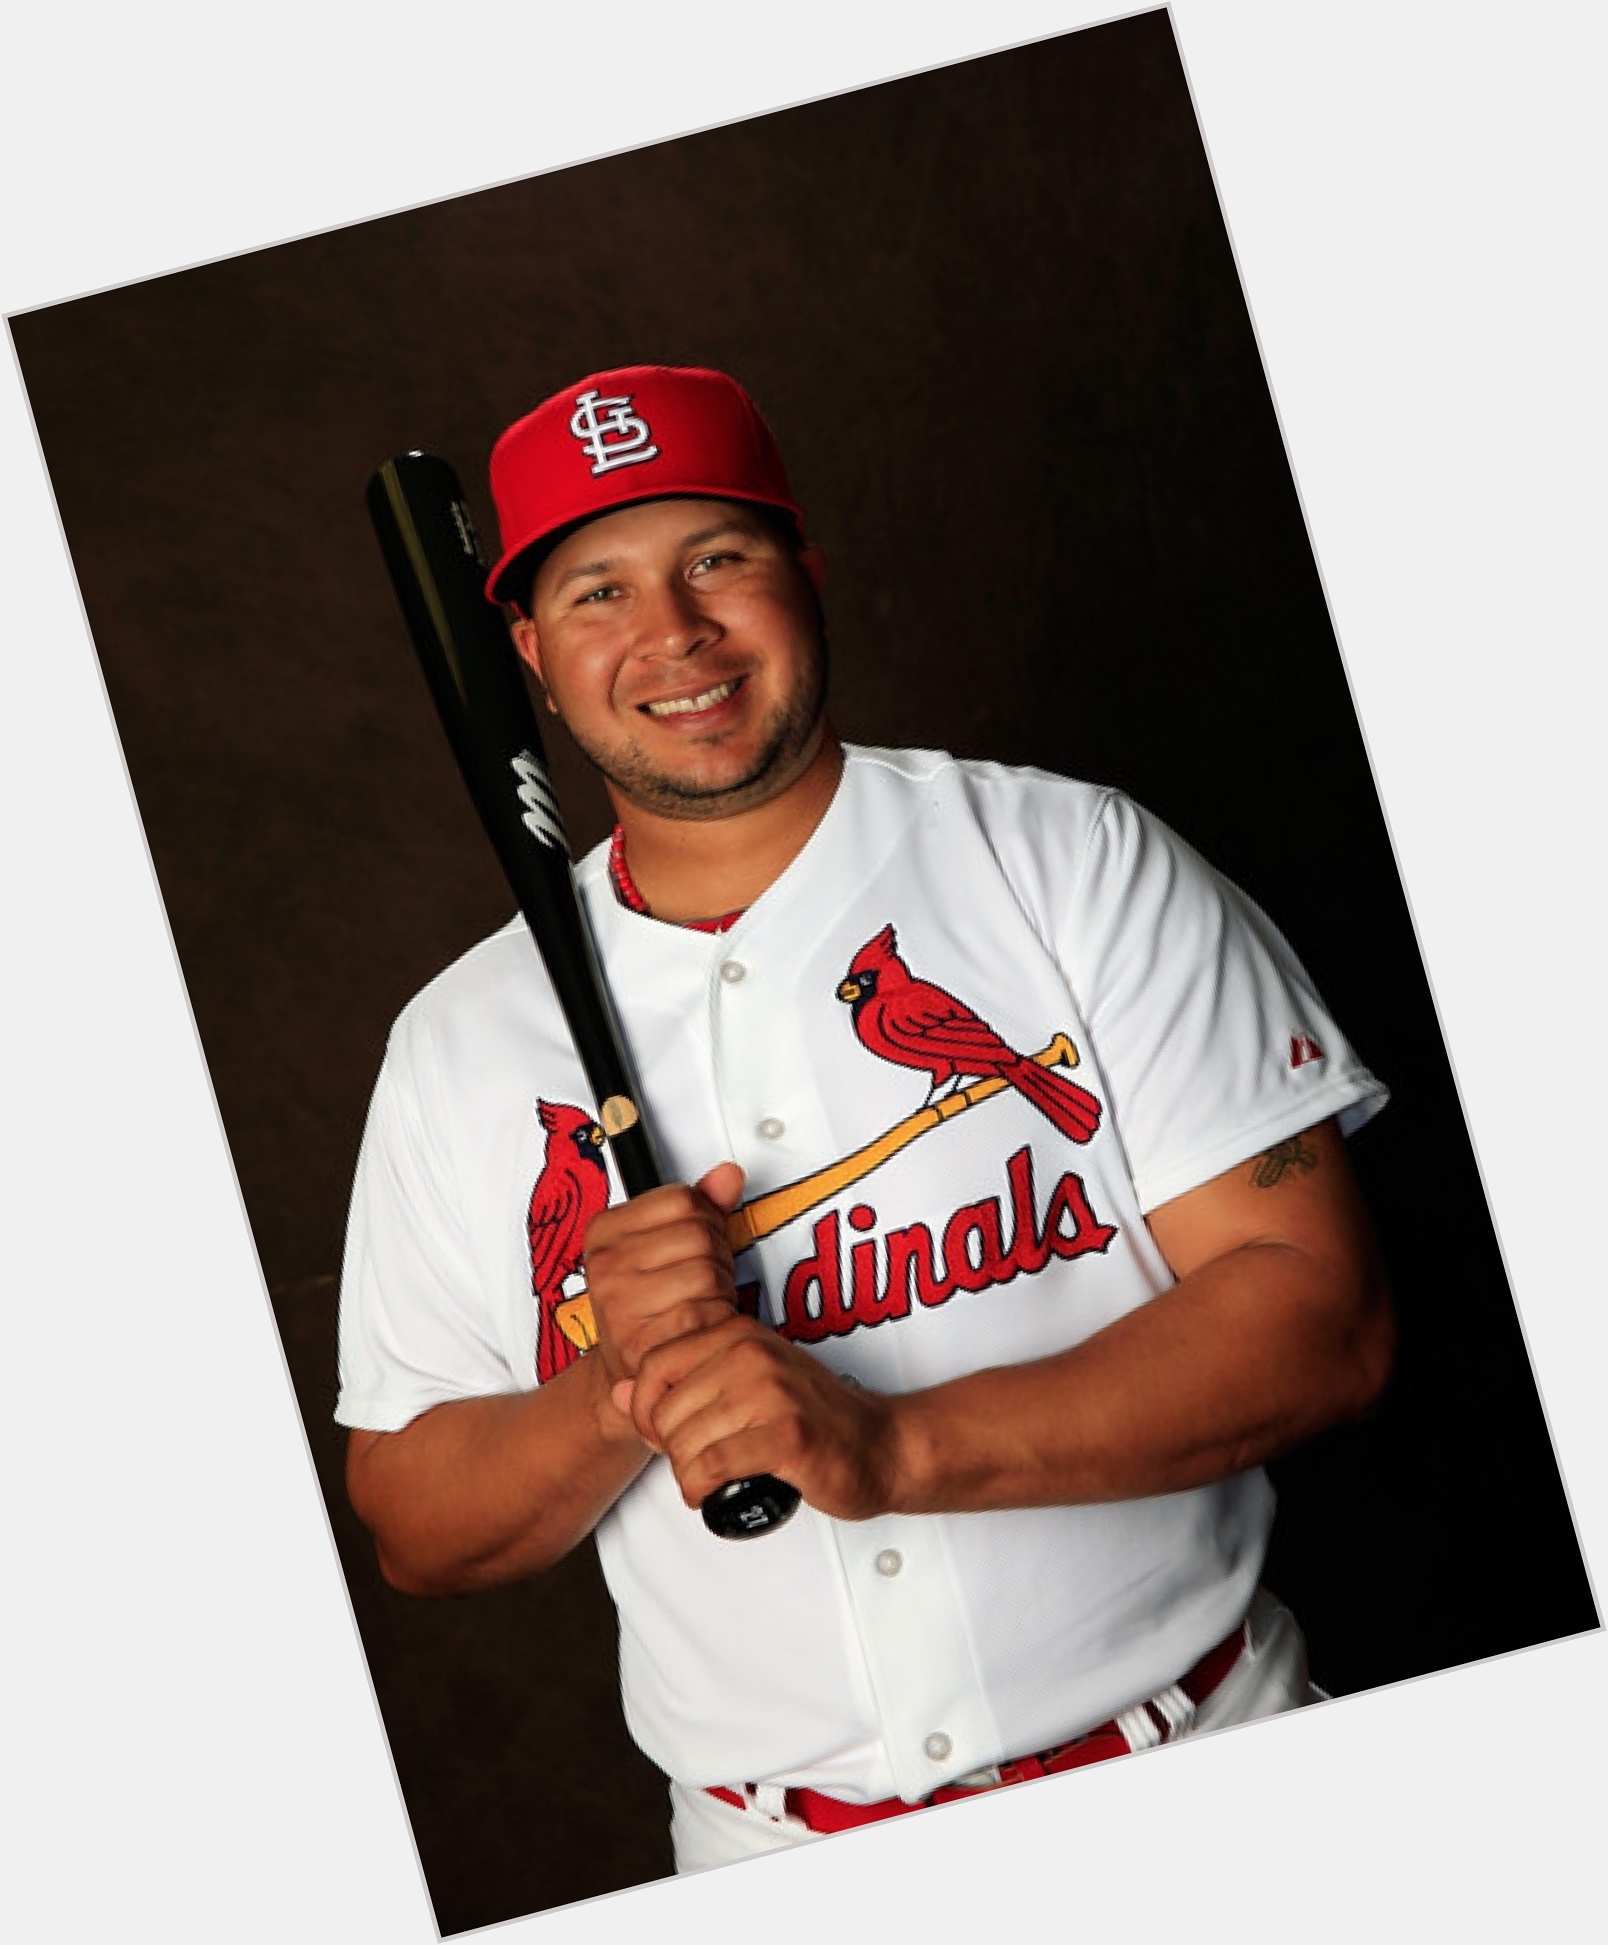 <a href="/hot-men/jhonny-peralta/is-he-related-wily-married-joel-where">Jhonny Peralta</a>  